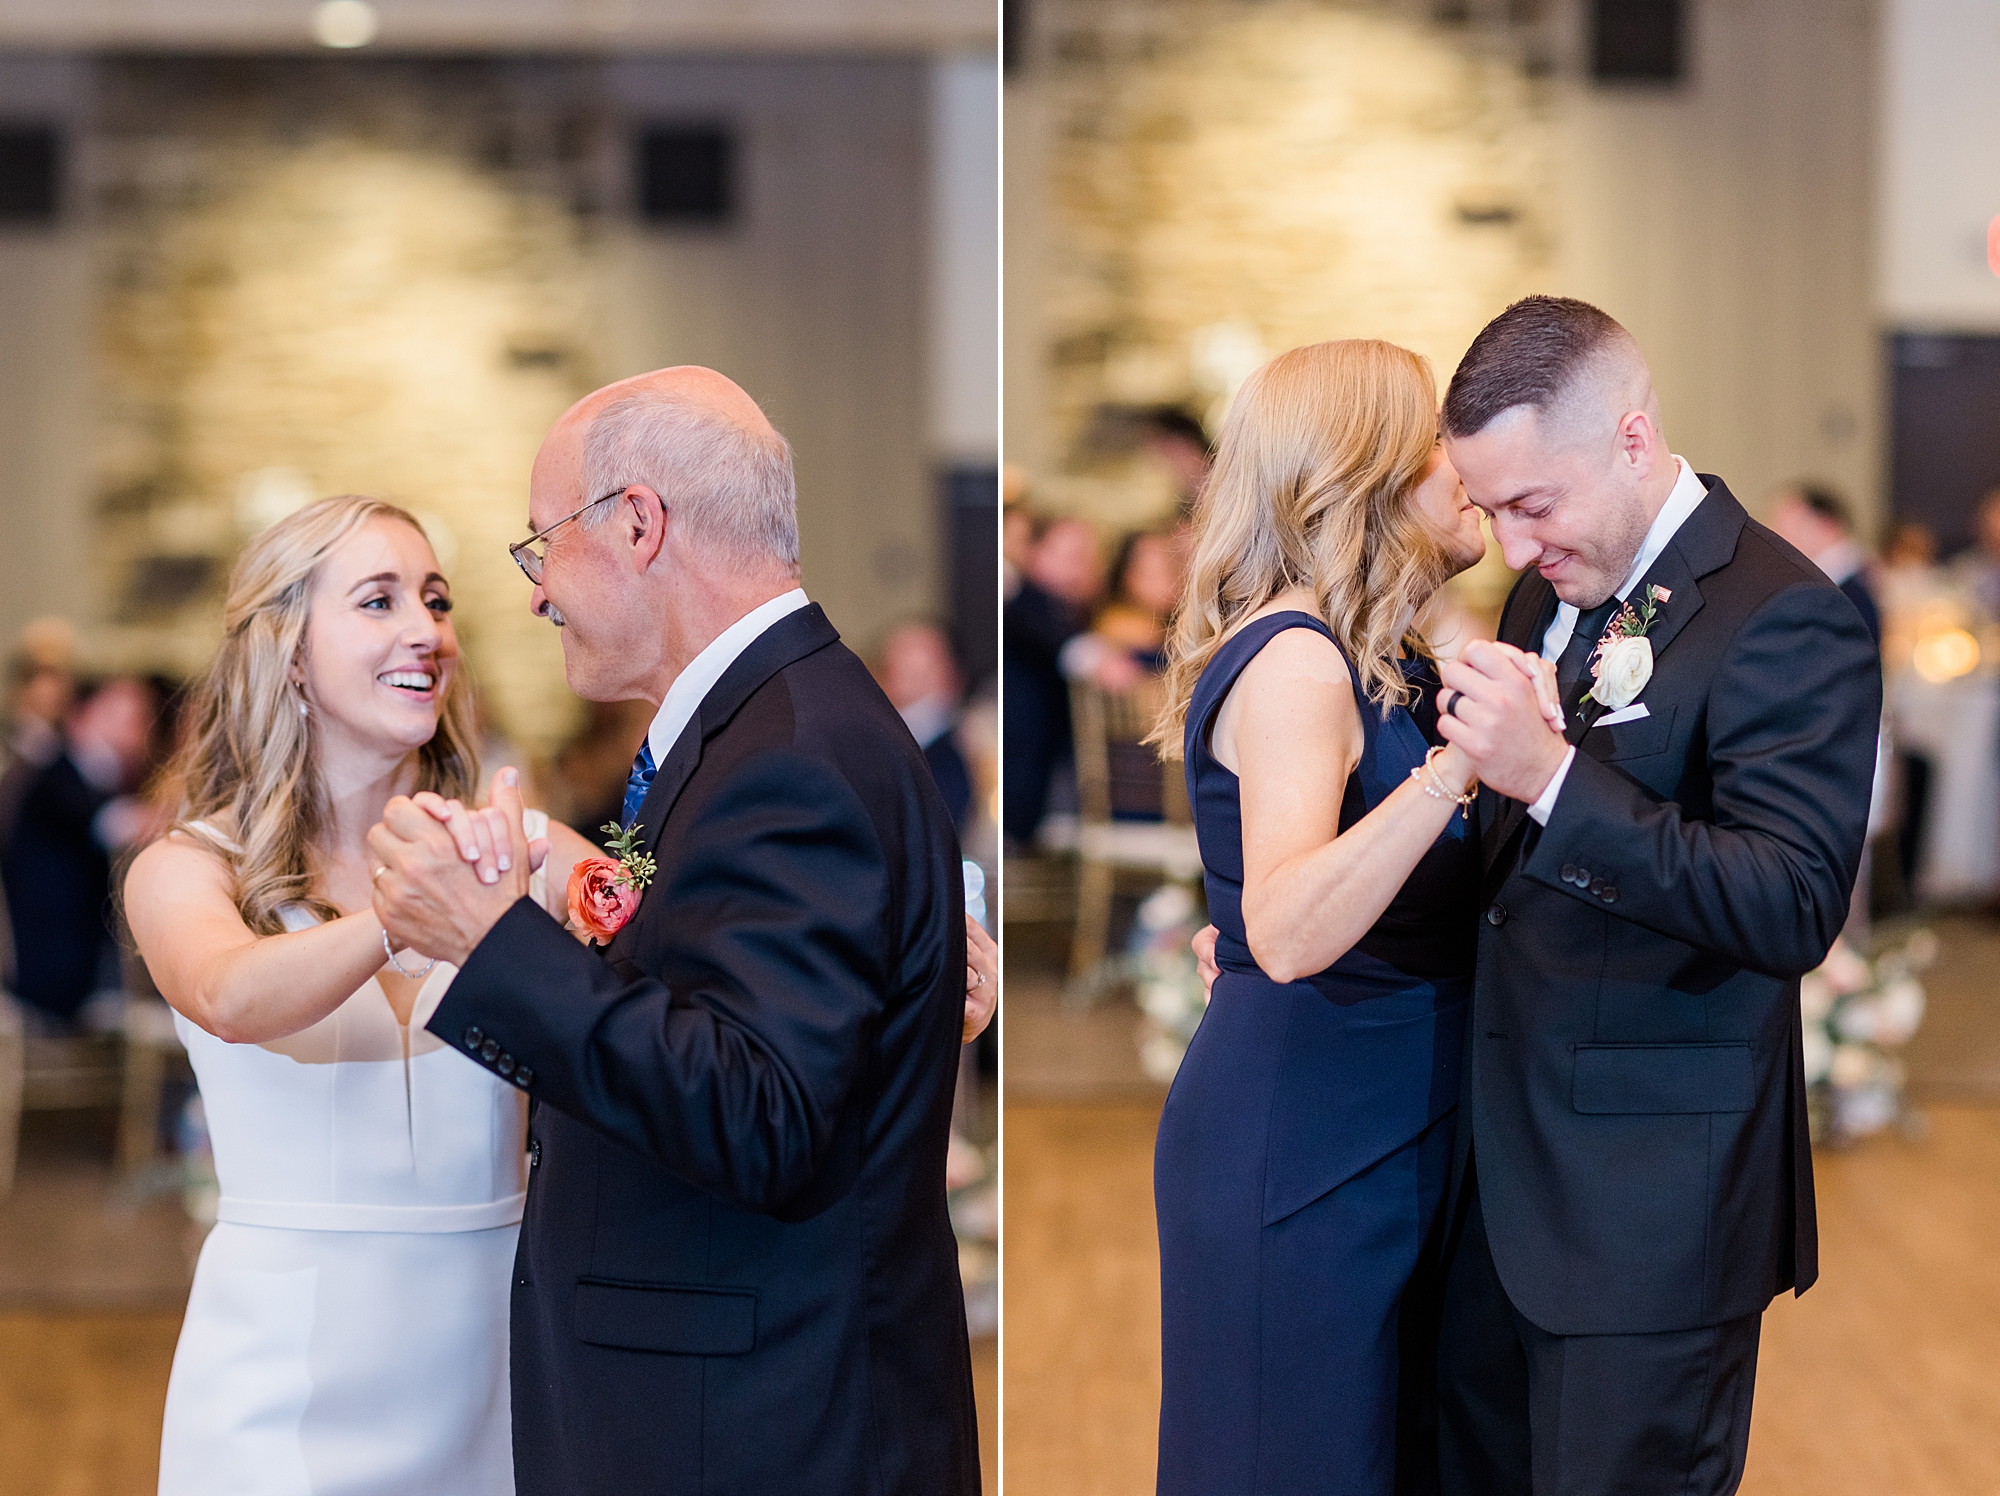 father-daughter and mother-son dance